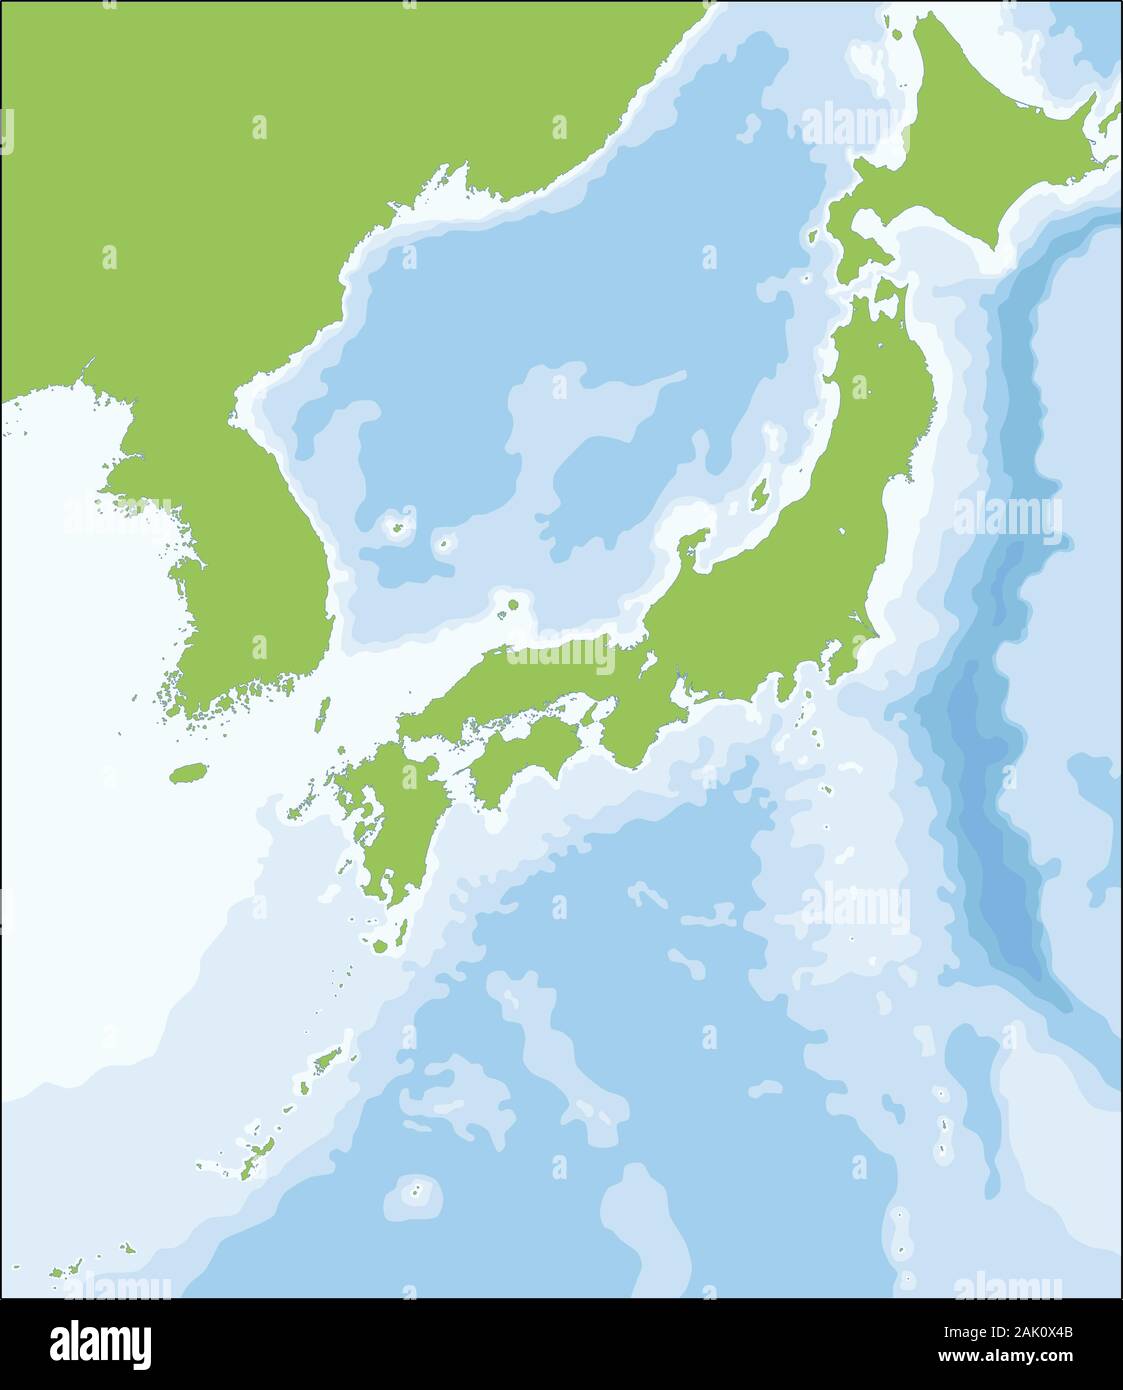 Vector illustration map of the Japanese territory Stock Vector